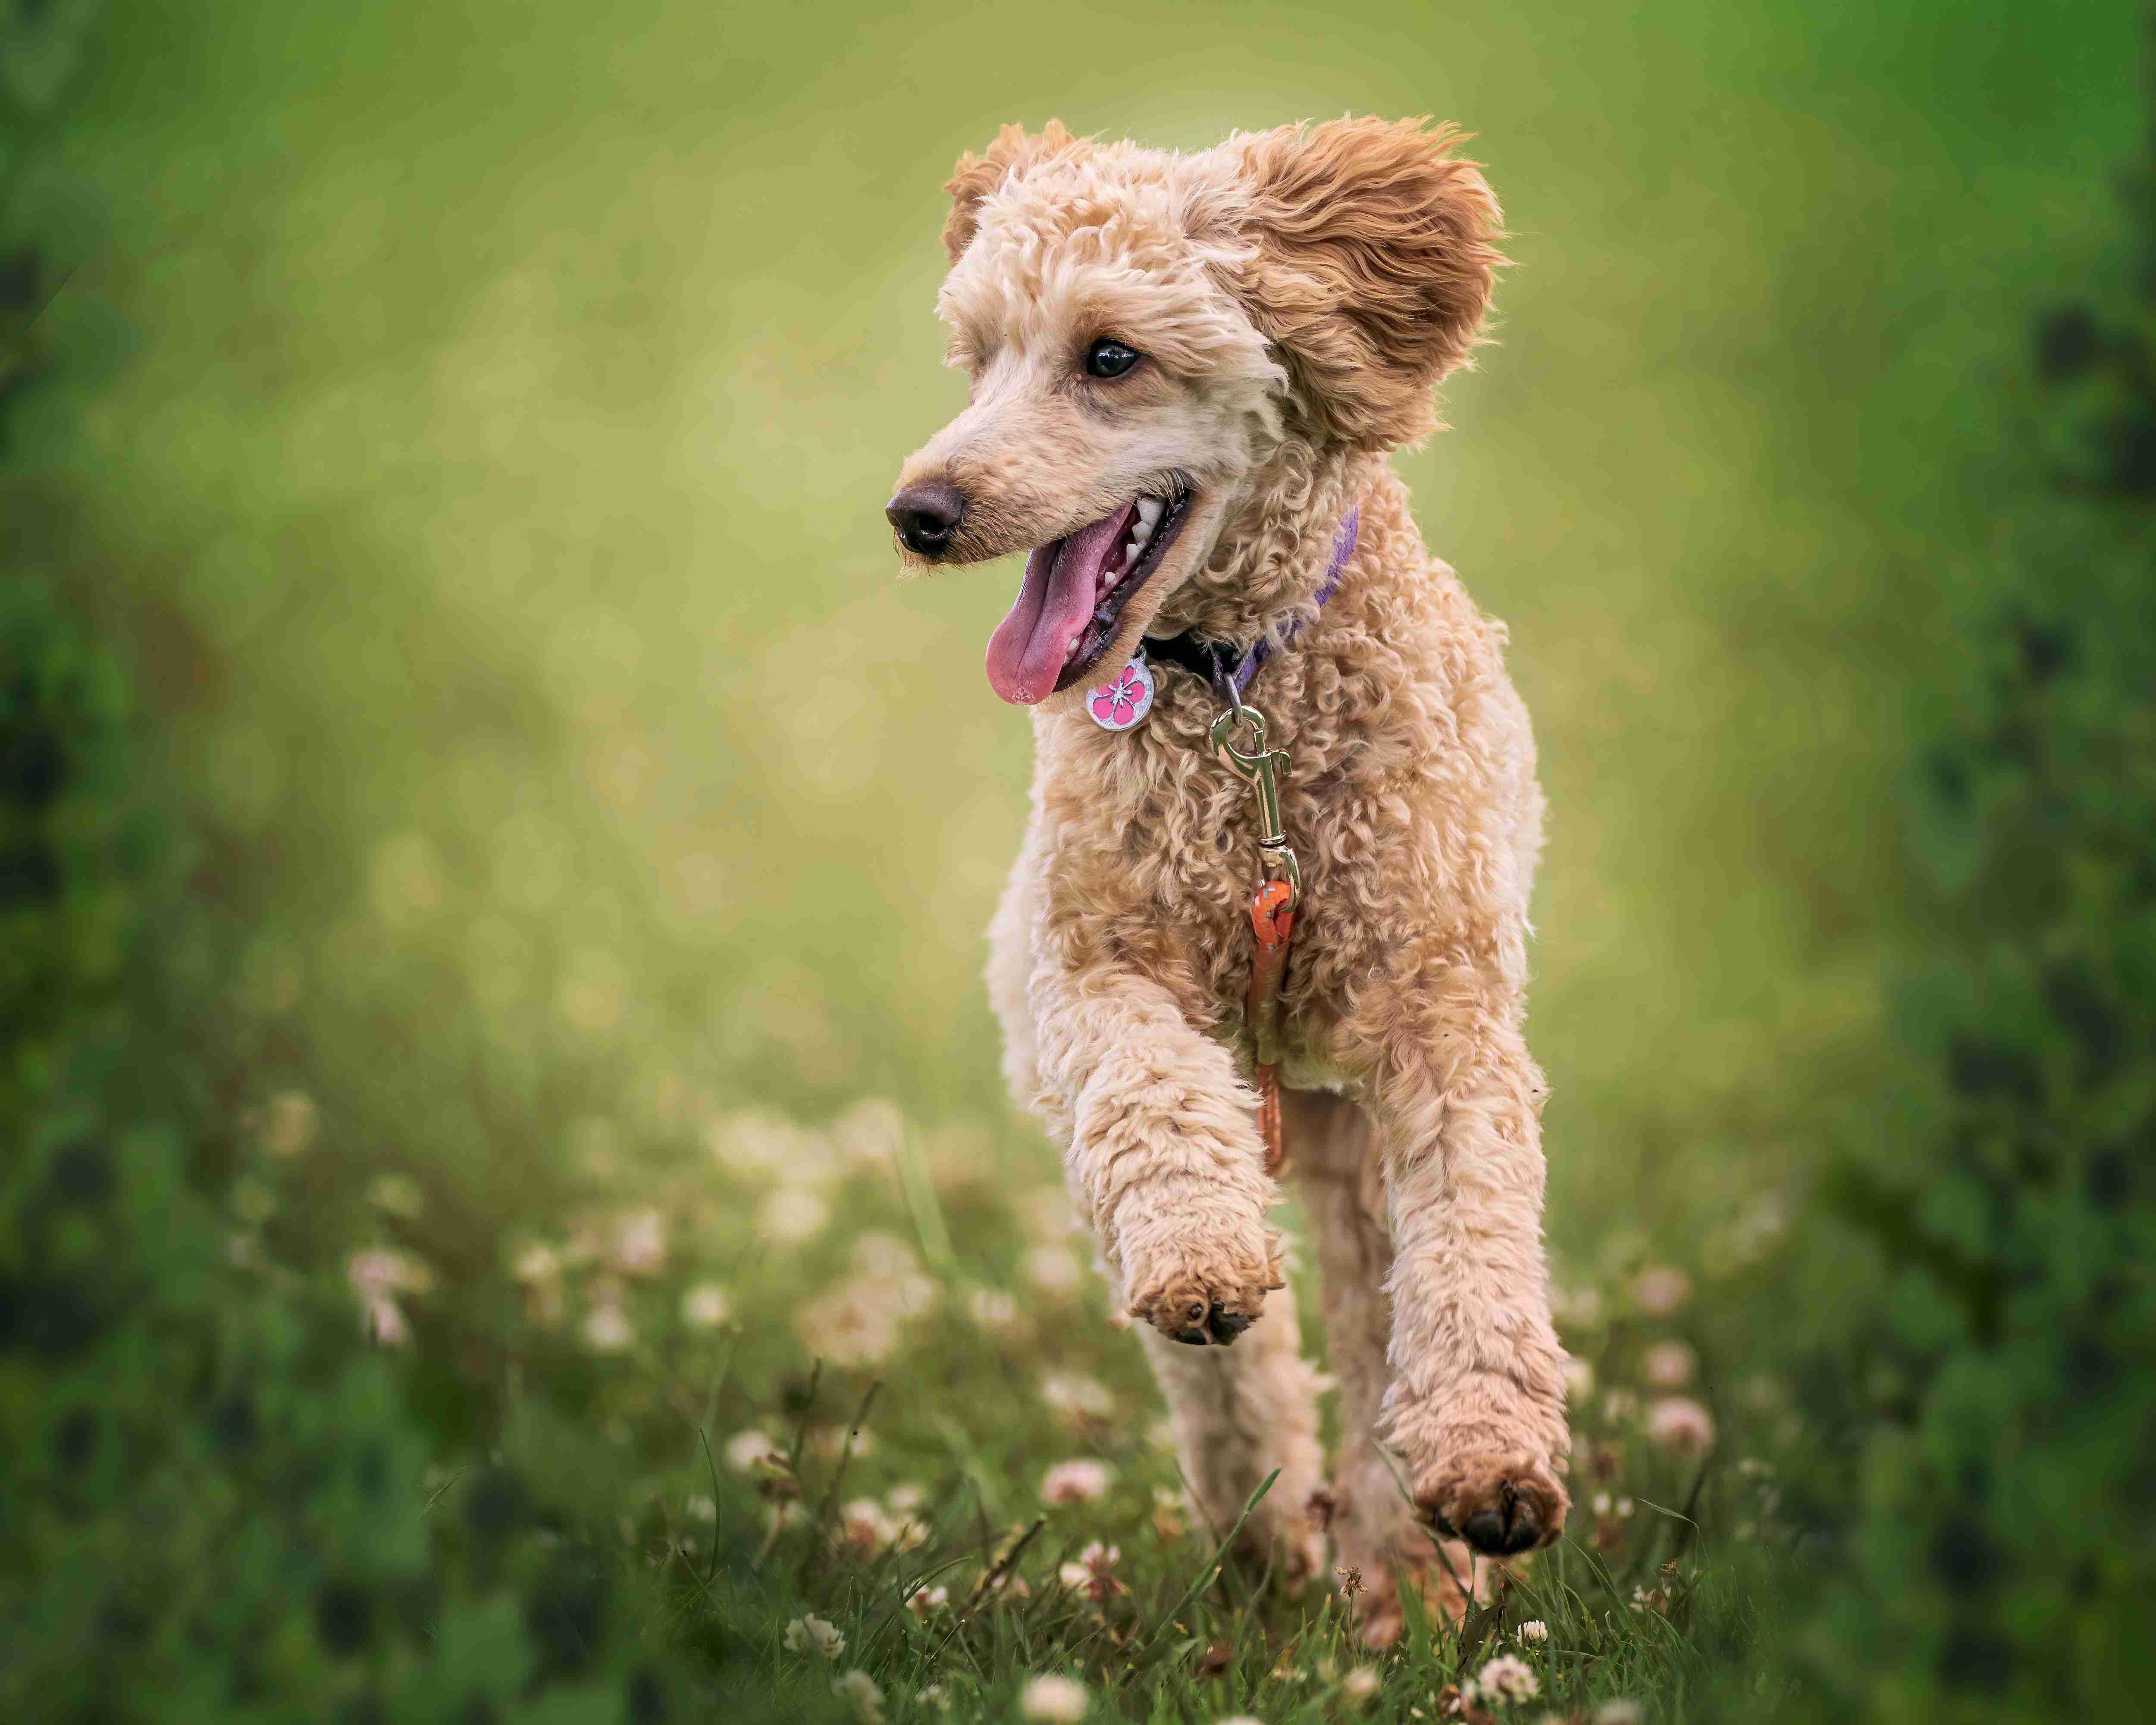 What are some common ear problems that Poodles may experience, and how can they be treated?